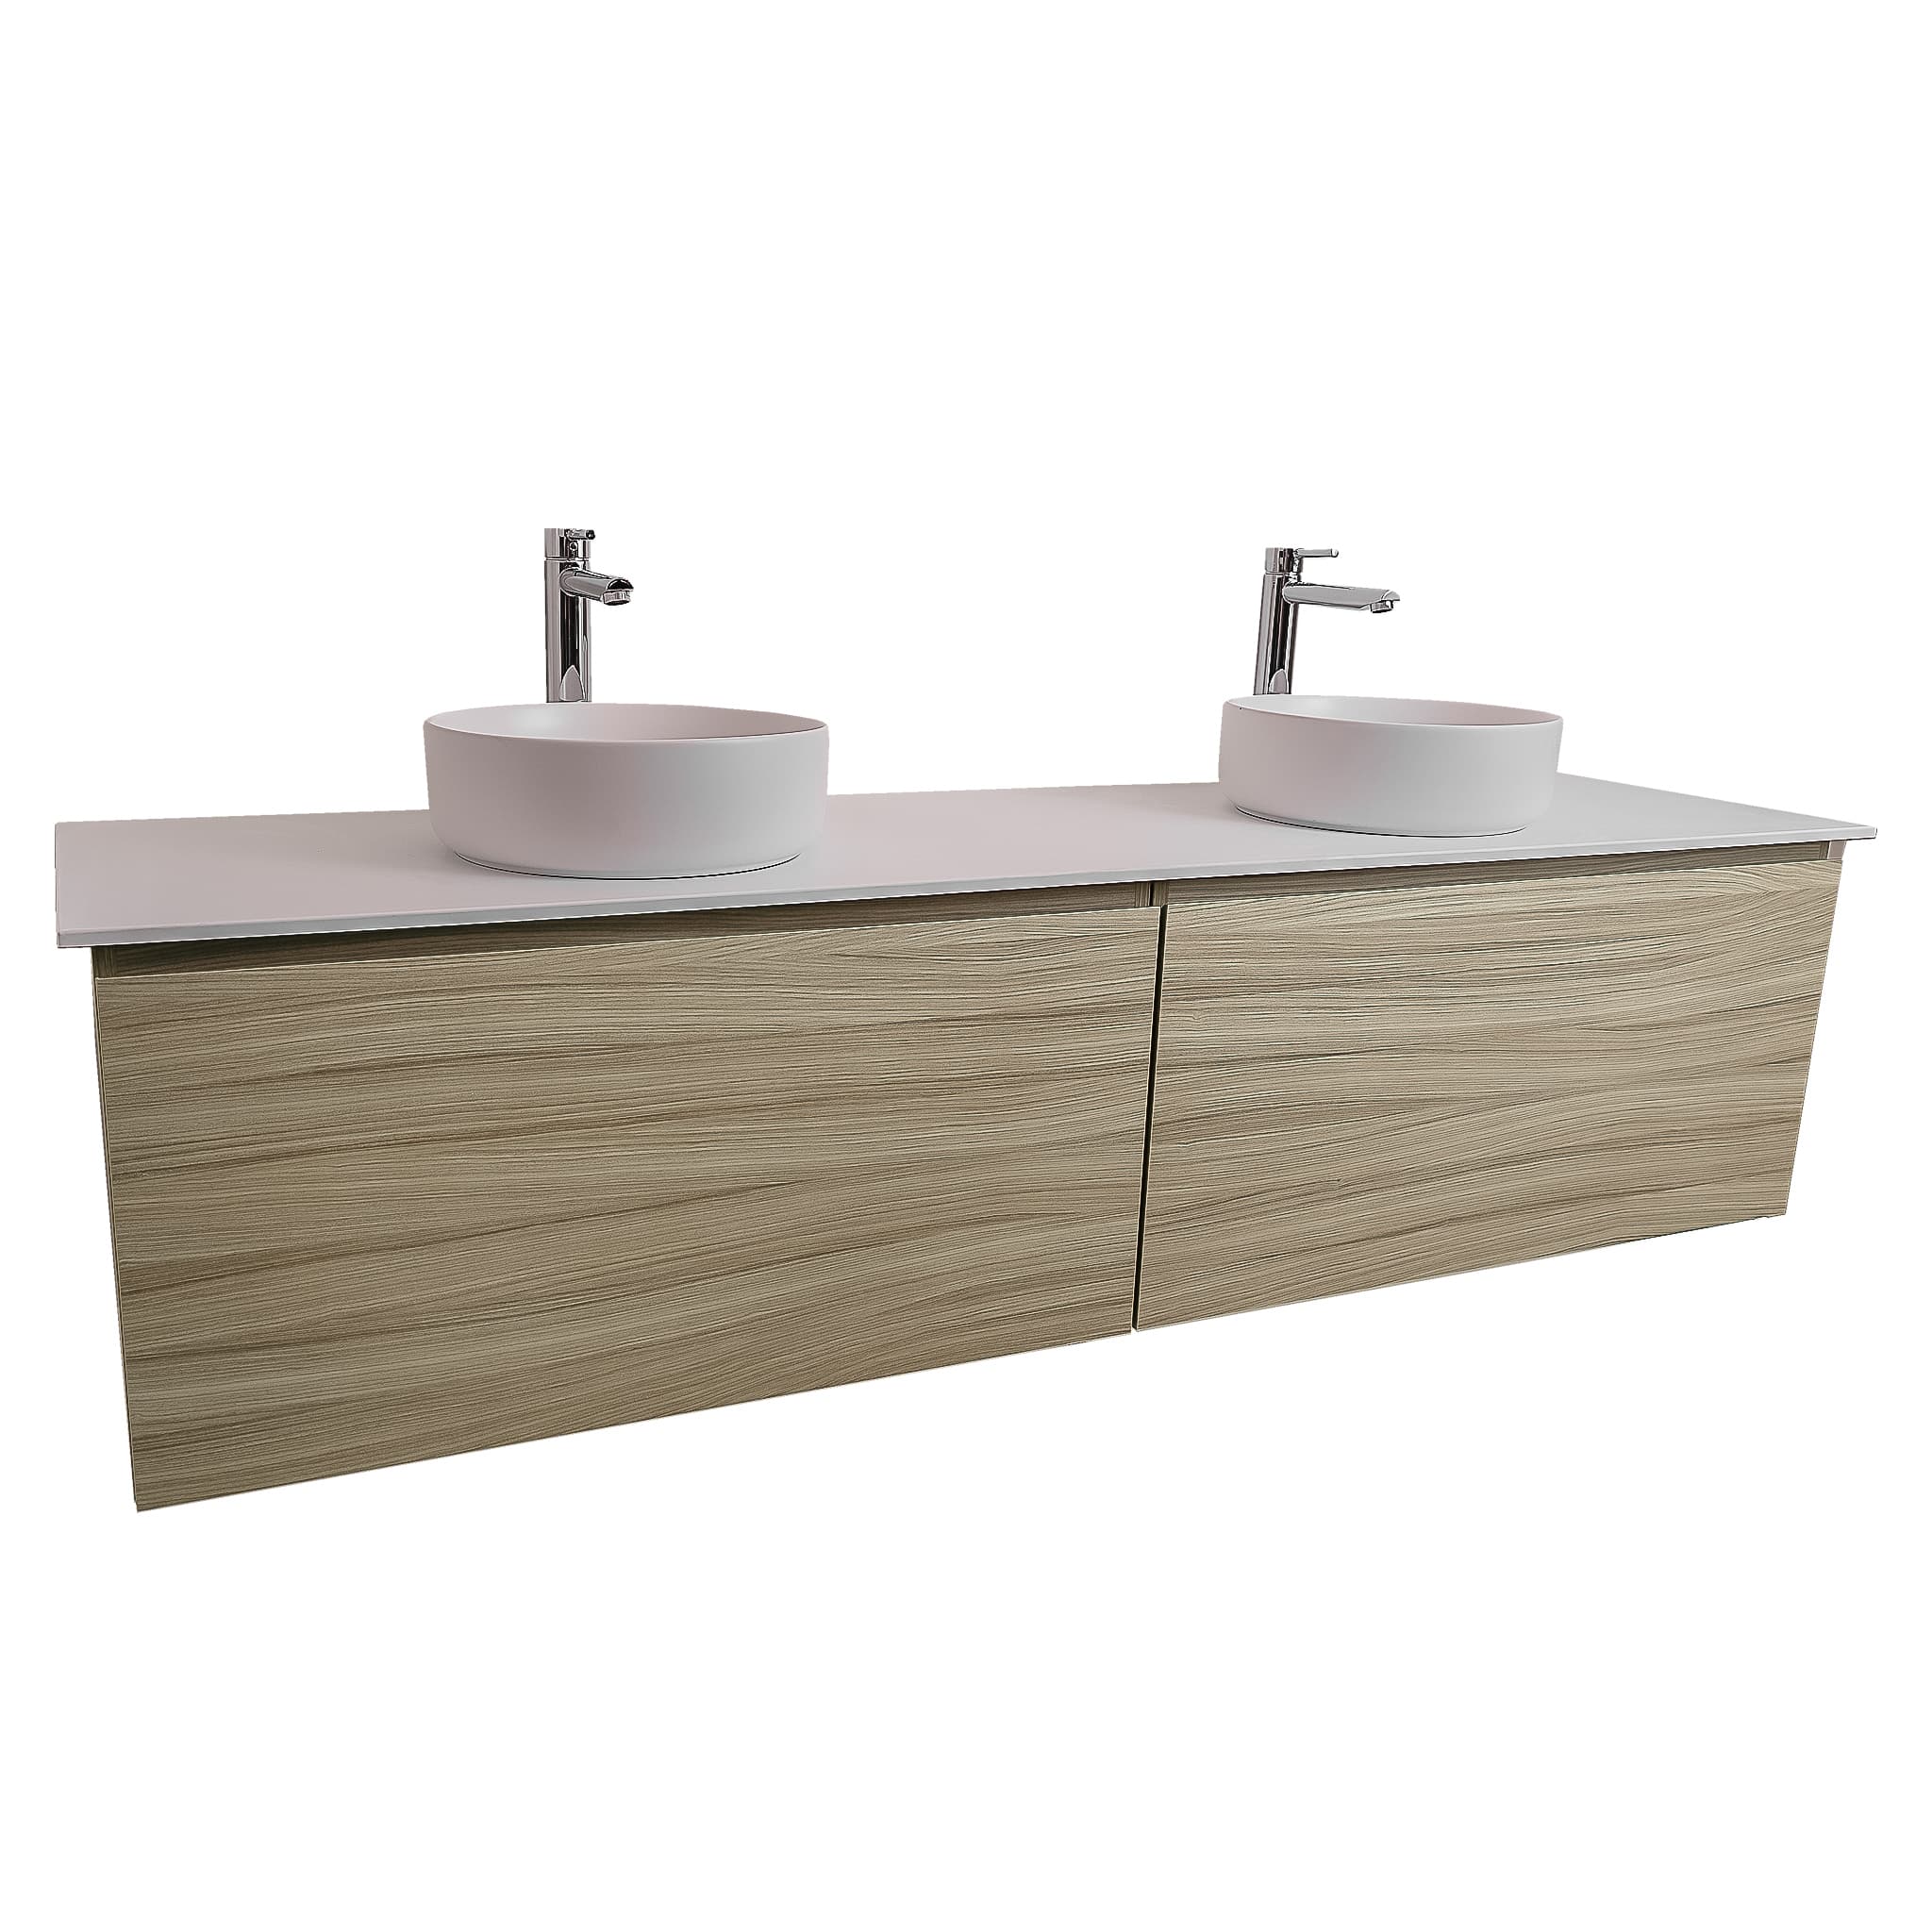 Venice 72 Nilo Grey Wood Texture Cabinet, Ares White Top And Two Ares White Ceramic Basin, Wall Mounted Modern Vanity Set